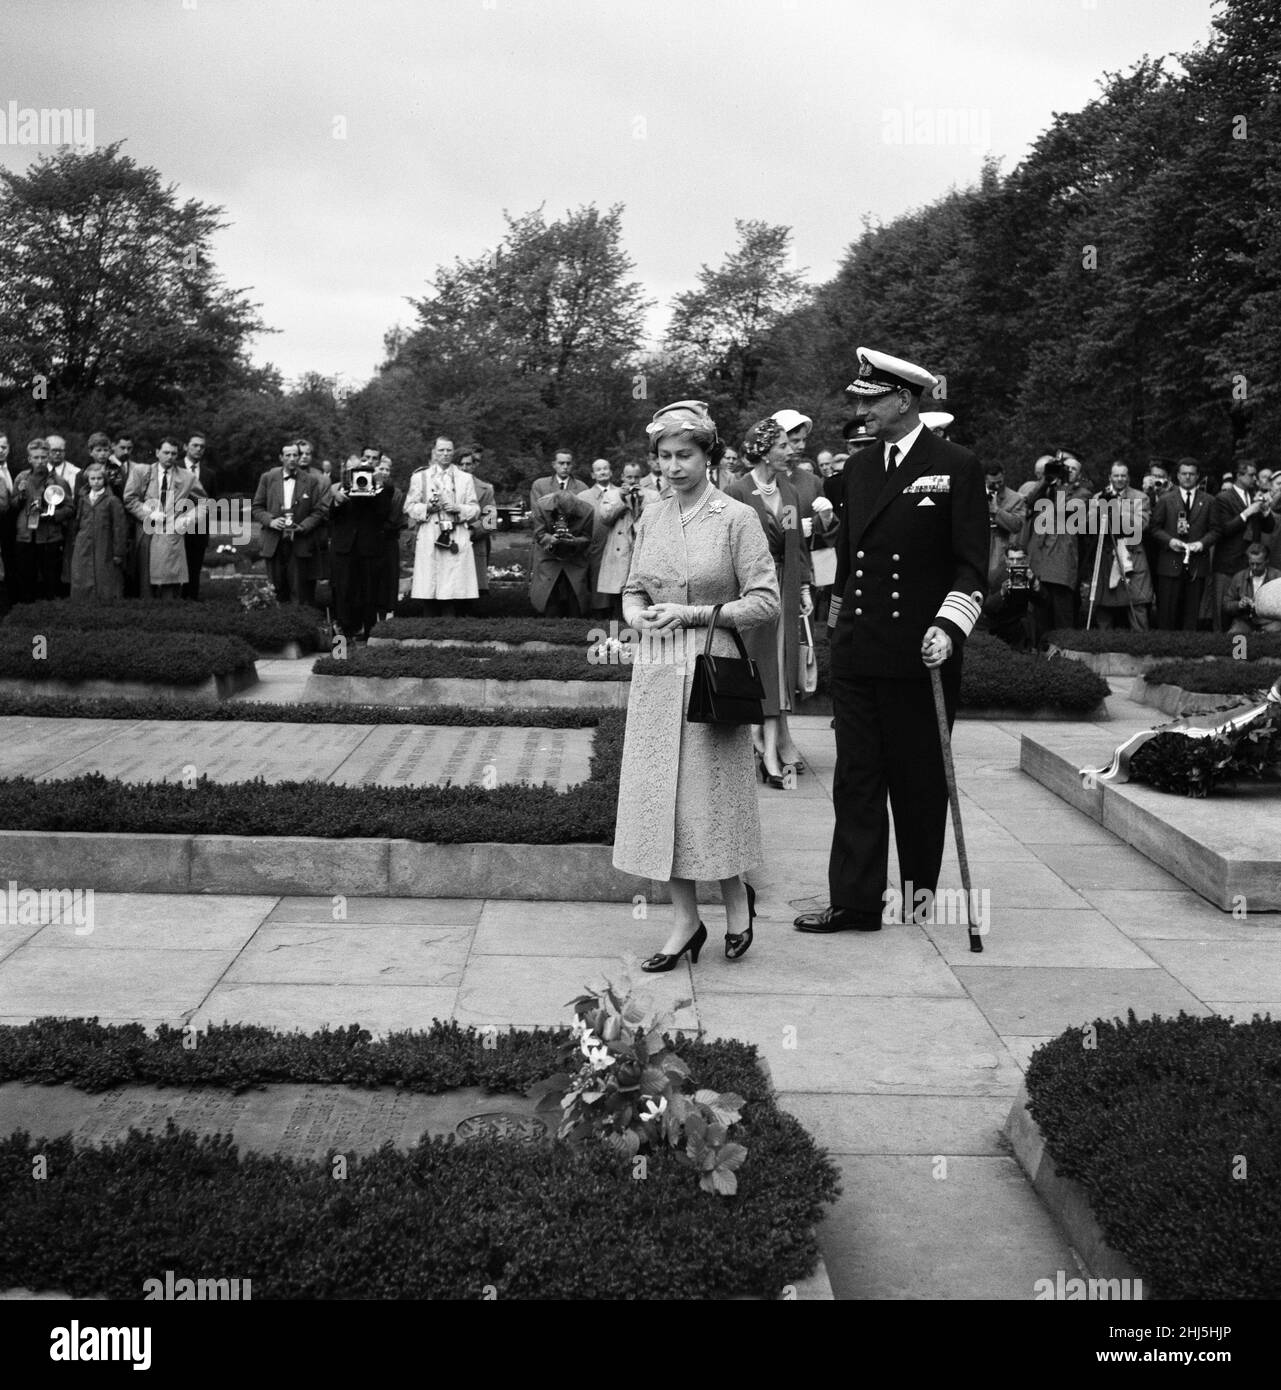 Queen Elizabeth II and Prince Philip, Duke of Edinburgh visit to Denmark. Queen Elizabeth II and King Frederik IX of Denmark pictured during a visit to the Memorial cemetery to the resistance movement. Behind them are Queen Ingrid and Danish Princess Margrethe. 23rd May 1957. Stock Photo